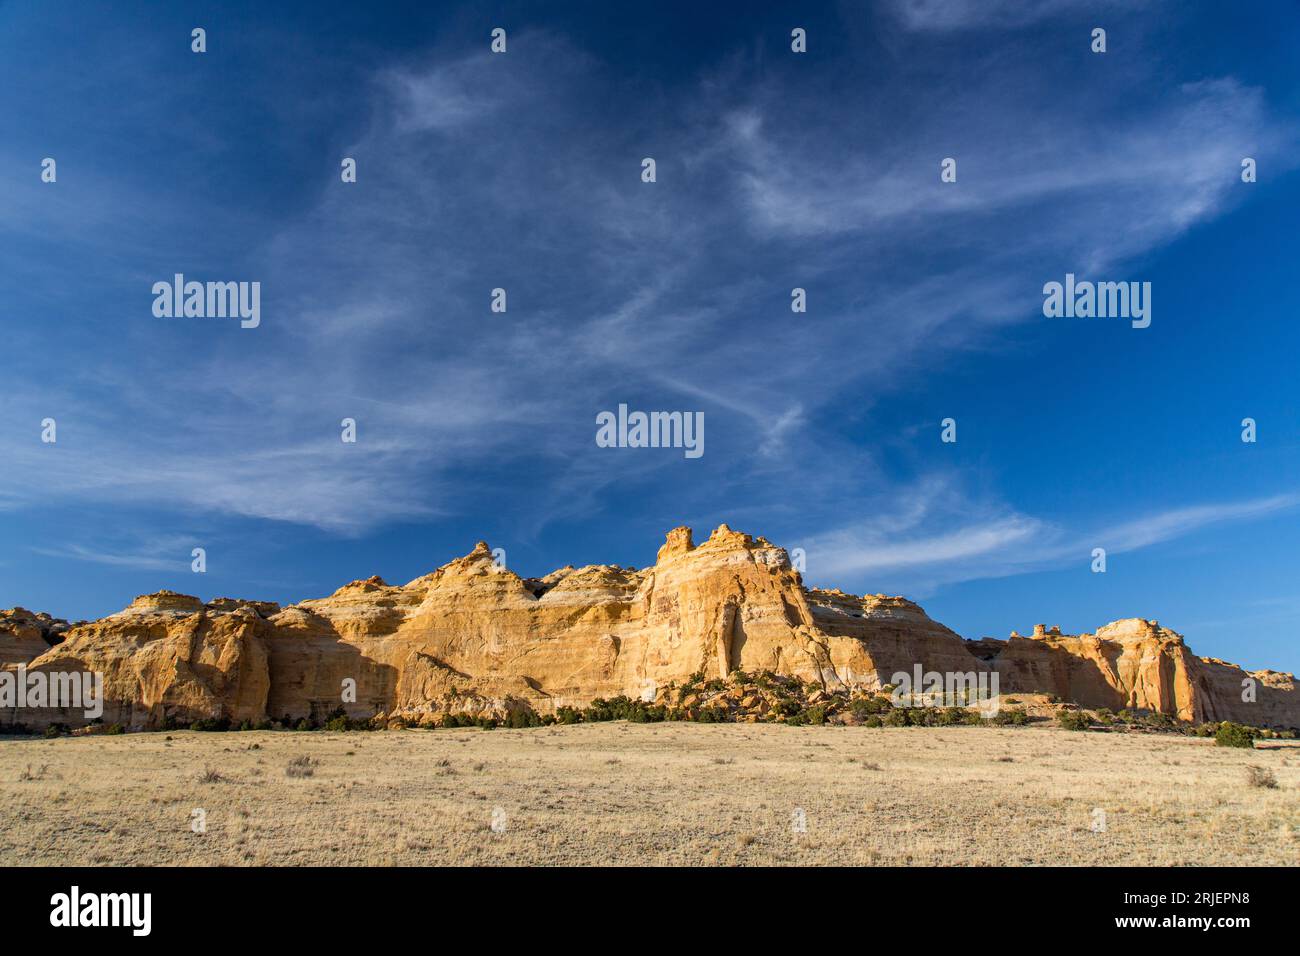 Colorful sculpted Navajo Sandstone formations in the Head of Sinbad area of the San Rafael Swell in Utah. Stock Photo